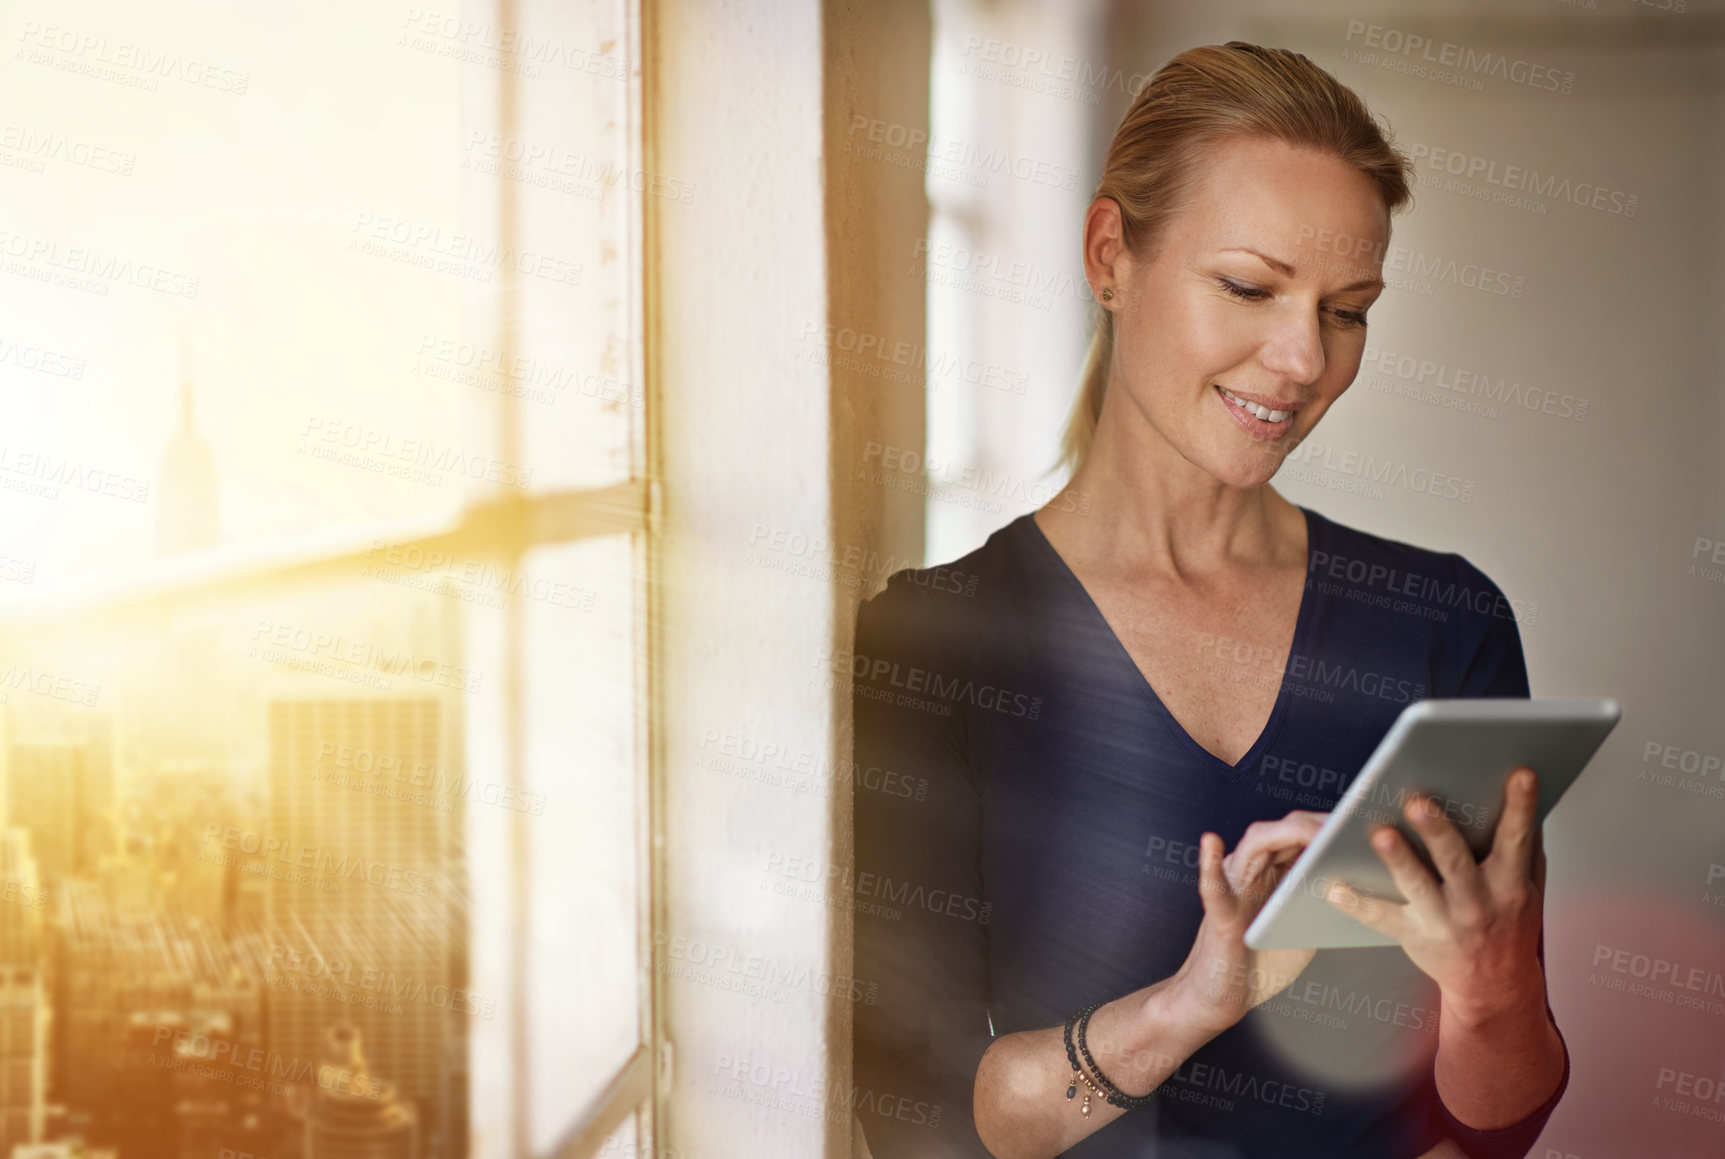 Buy stock photo Cropped shot of a businesswoman using a digital tablet in her office